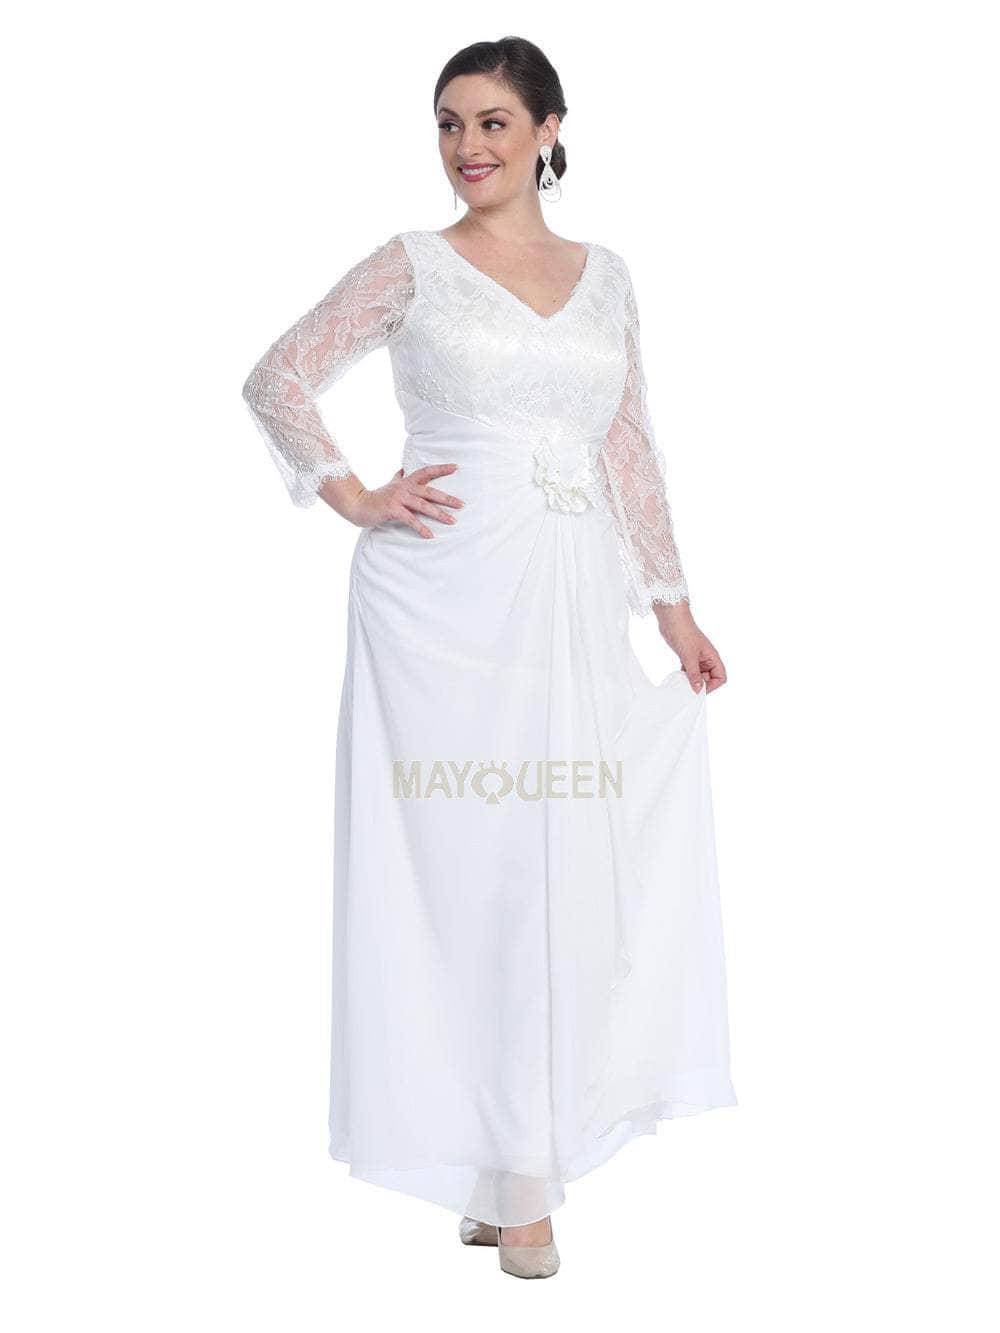 May Queen - Sheer Long Sleeve Floral Accented A-Line Evening Dress Special Occasion Dress M / Ivory